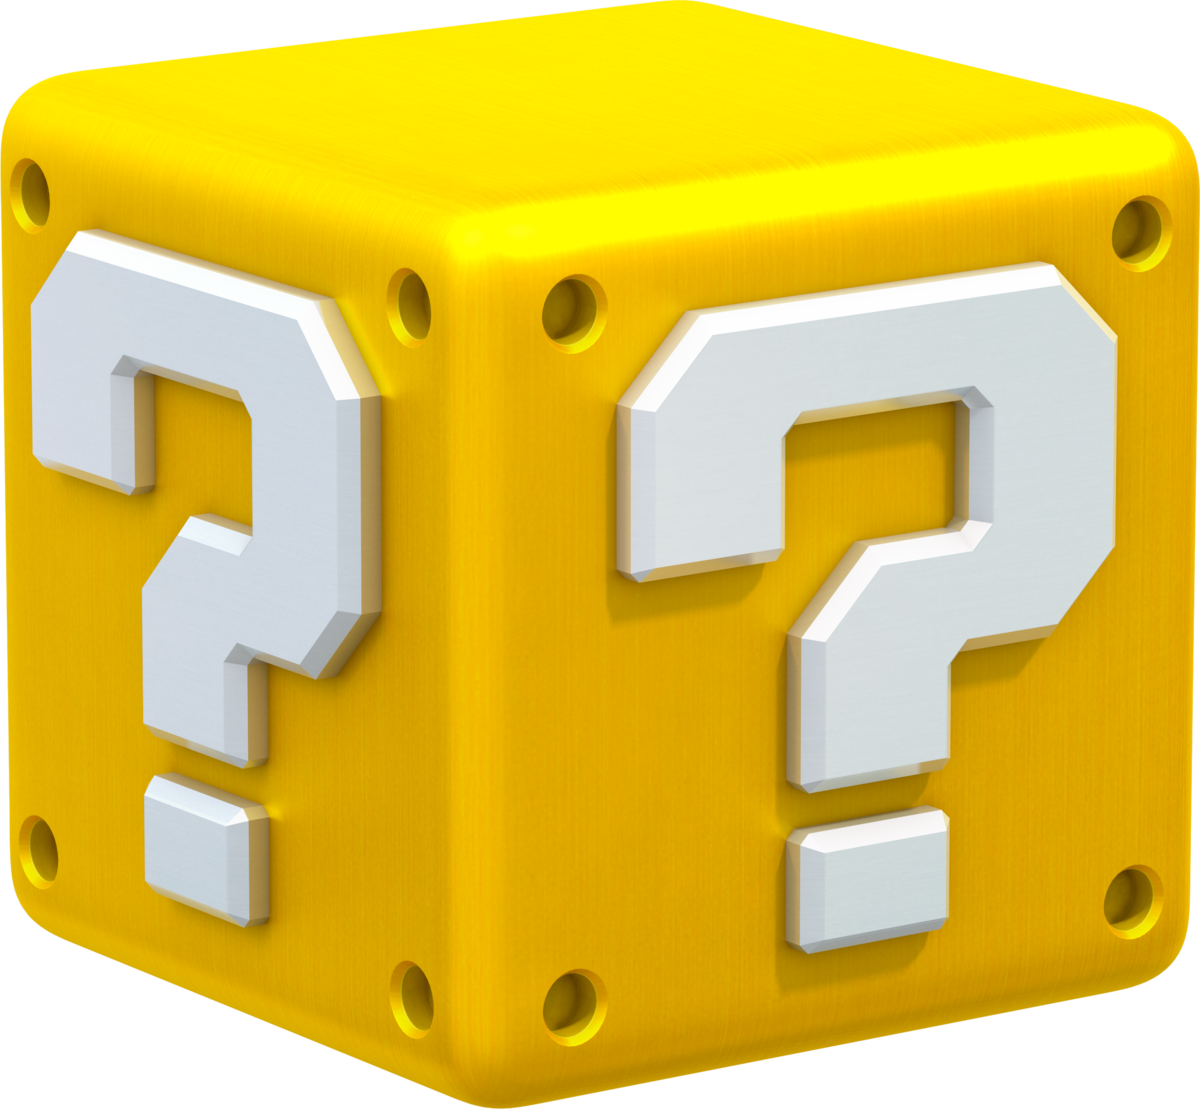 https://mario.wiki.gallery/images/thumb/4/48/Question_Block_Artwork_-_Super_Mario_3D_World.png/1200px-Question_Block_Artwork_-_Super_Mario_3D_World.png